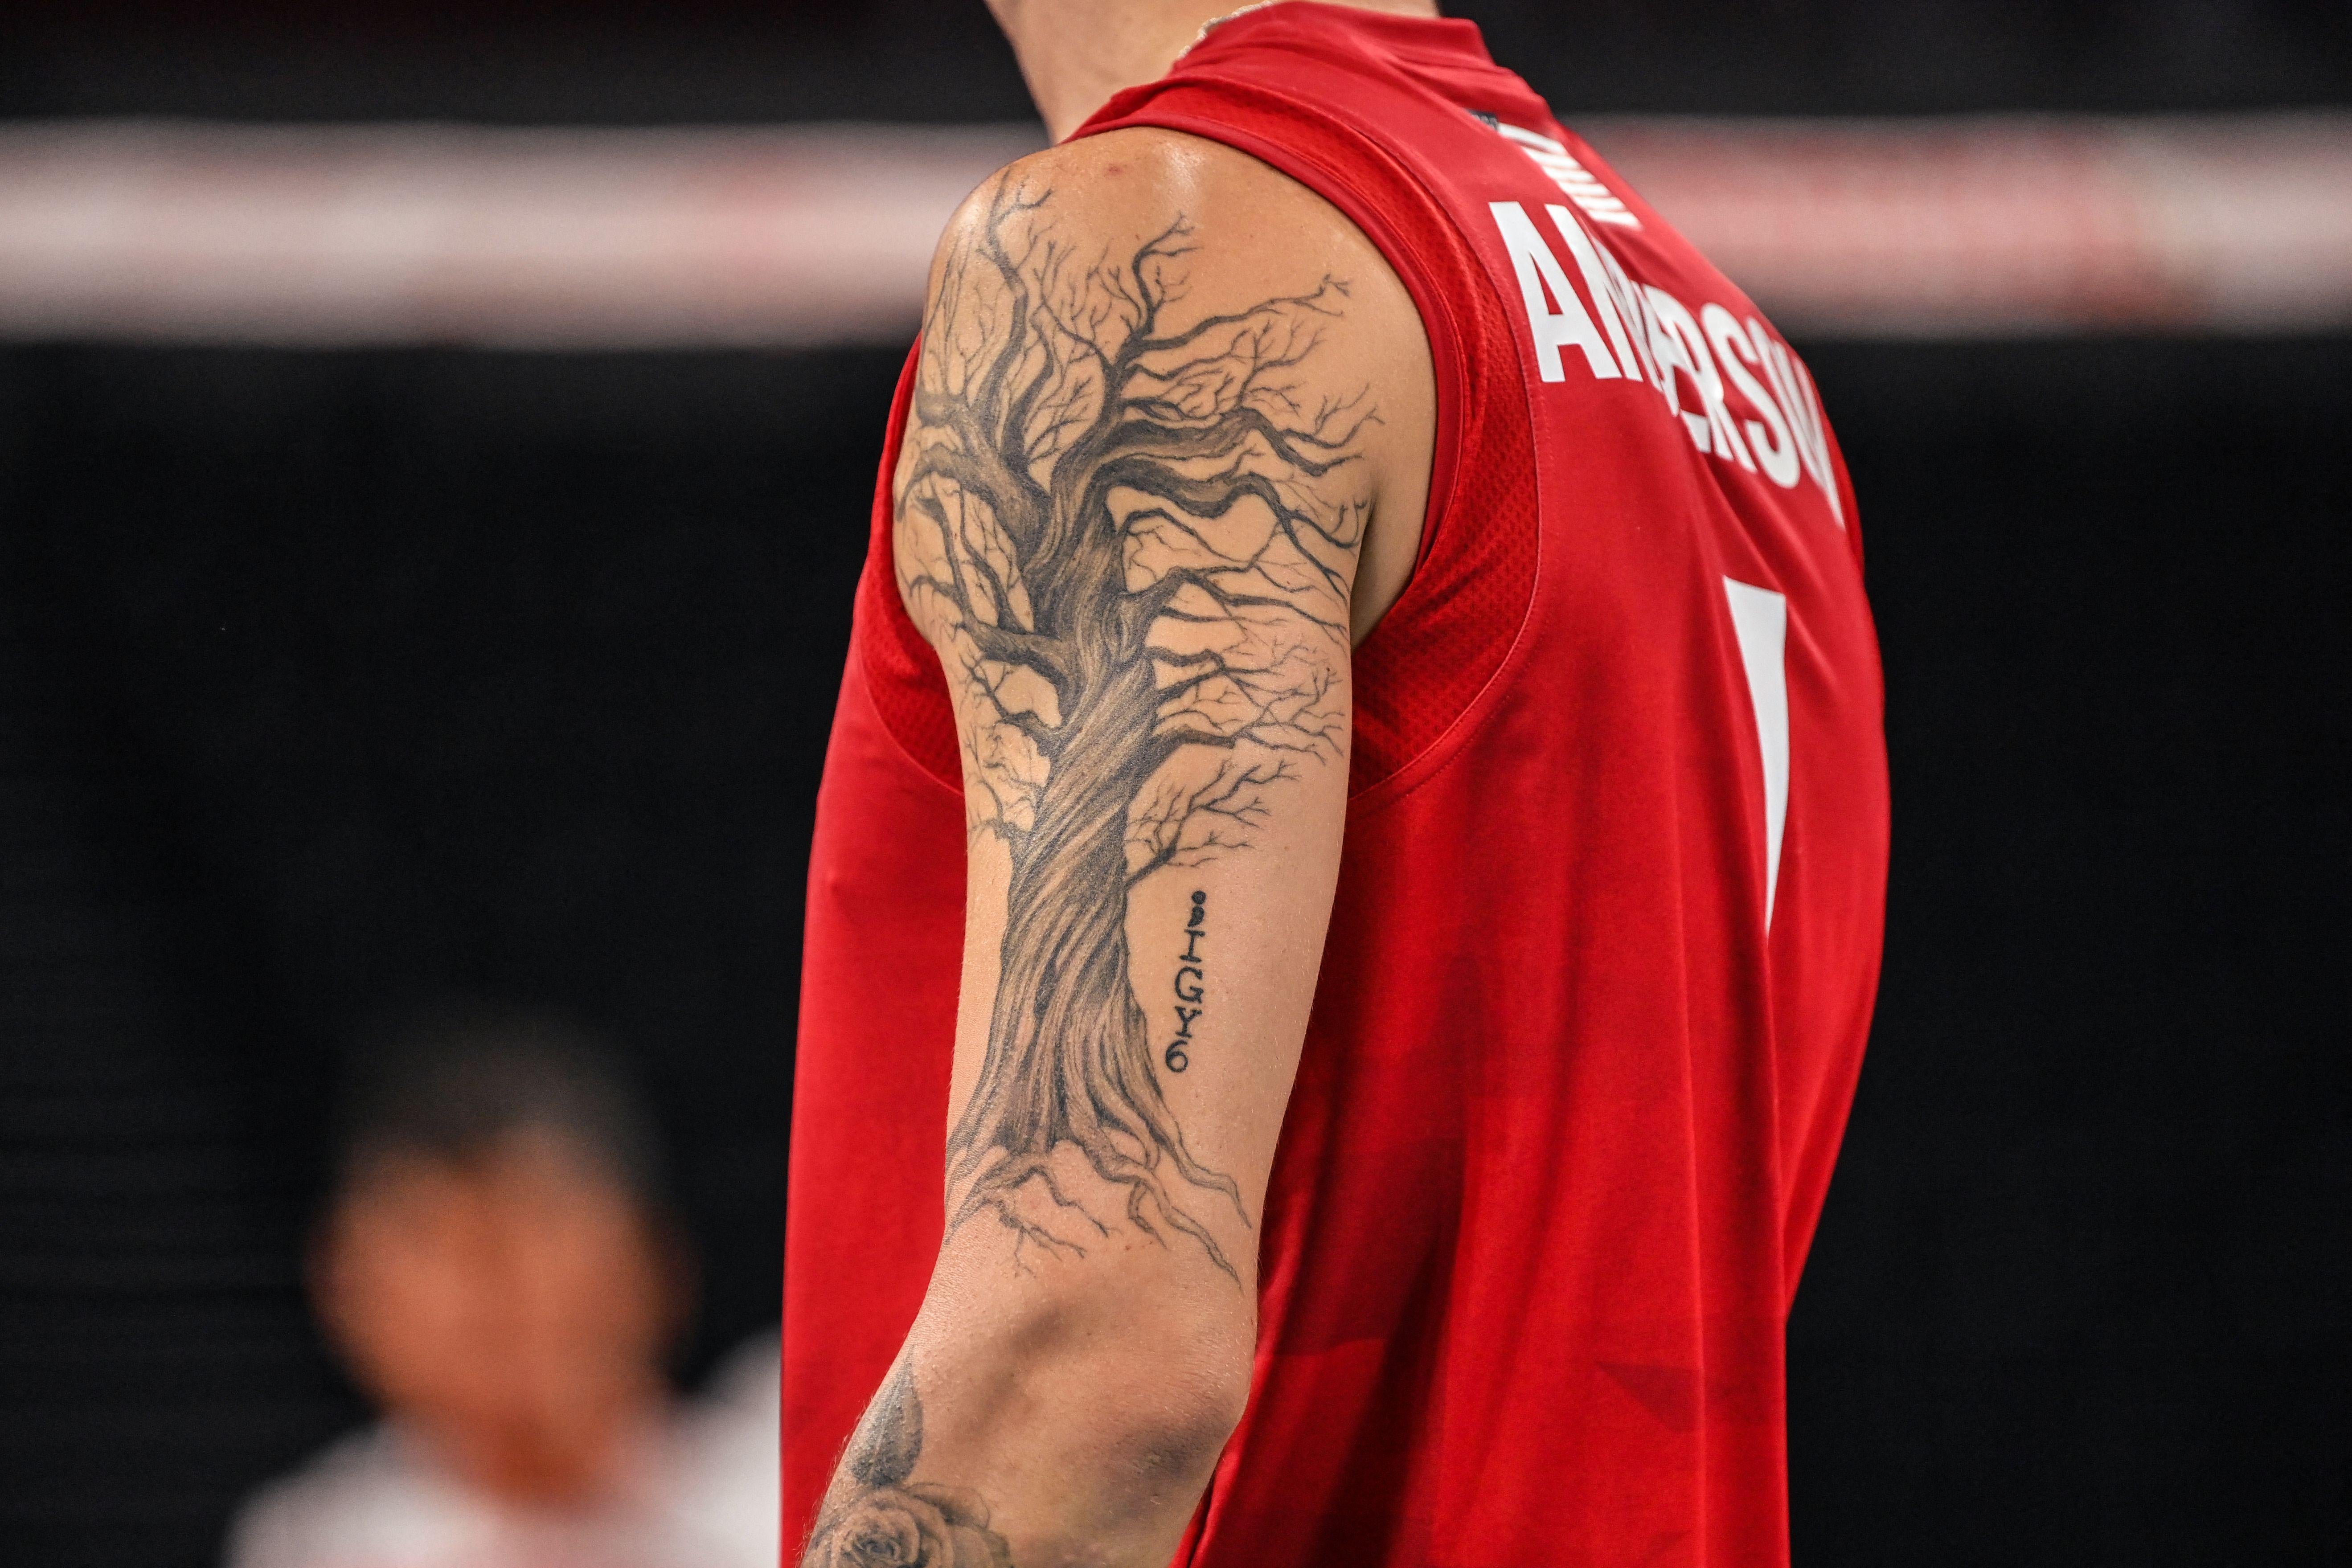 Anderson's left arm with a large twisted leafless tree tattoo on it, in tank uniform for indoor volleyball